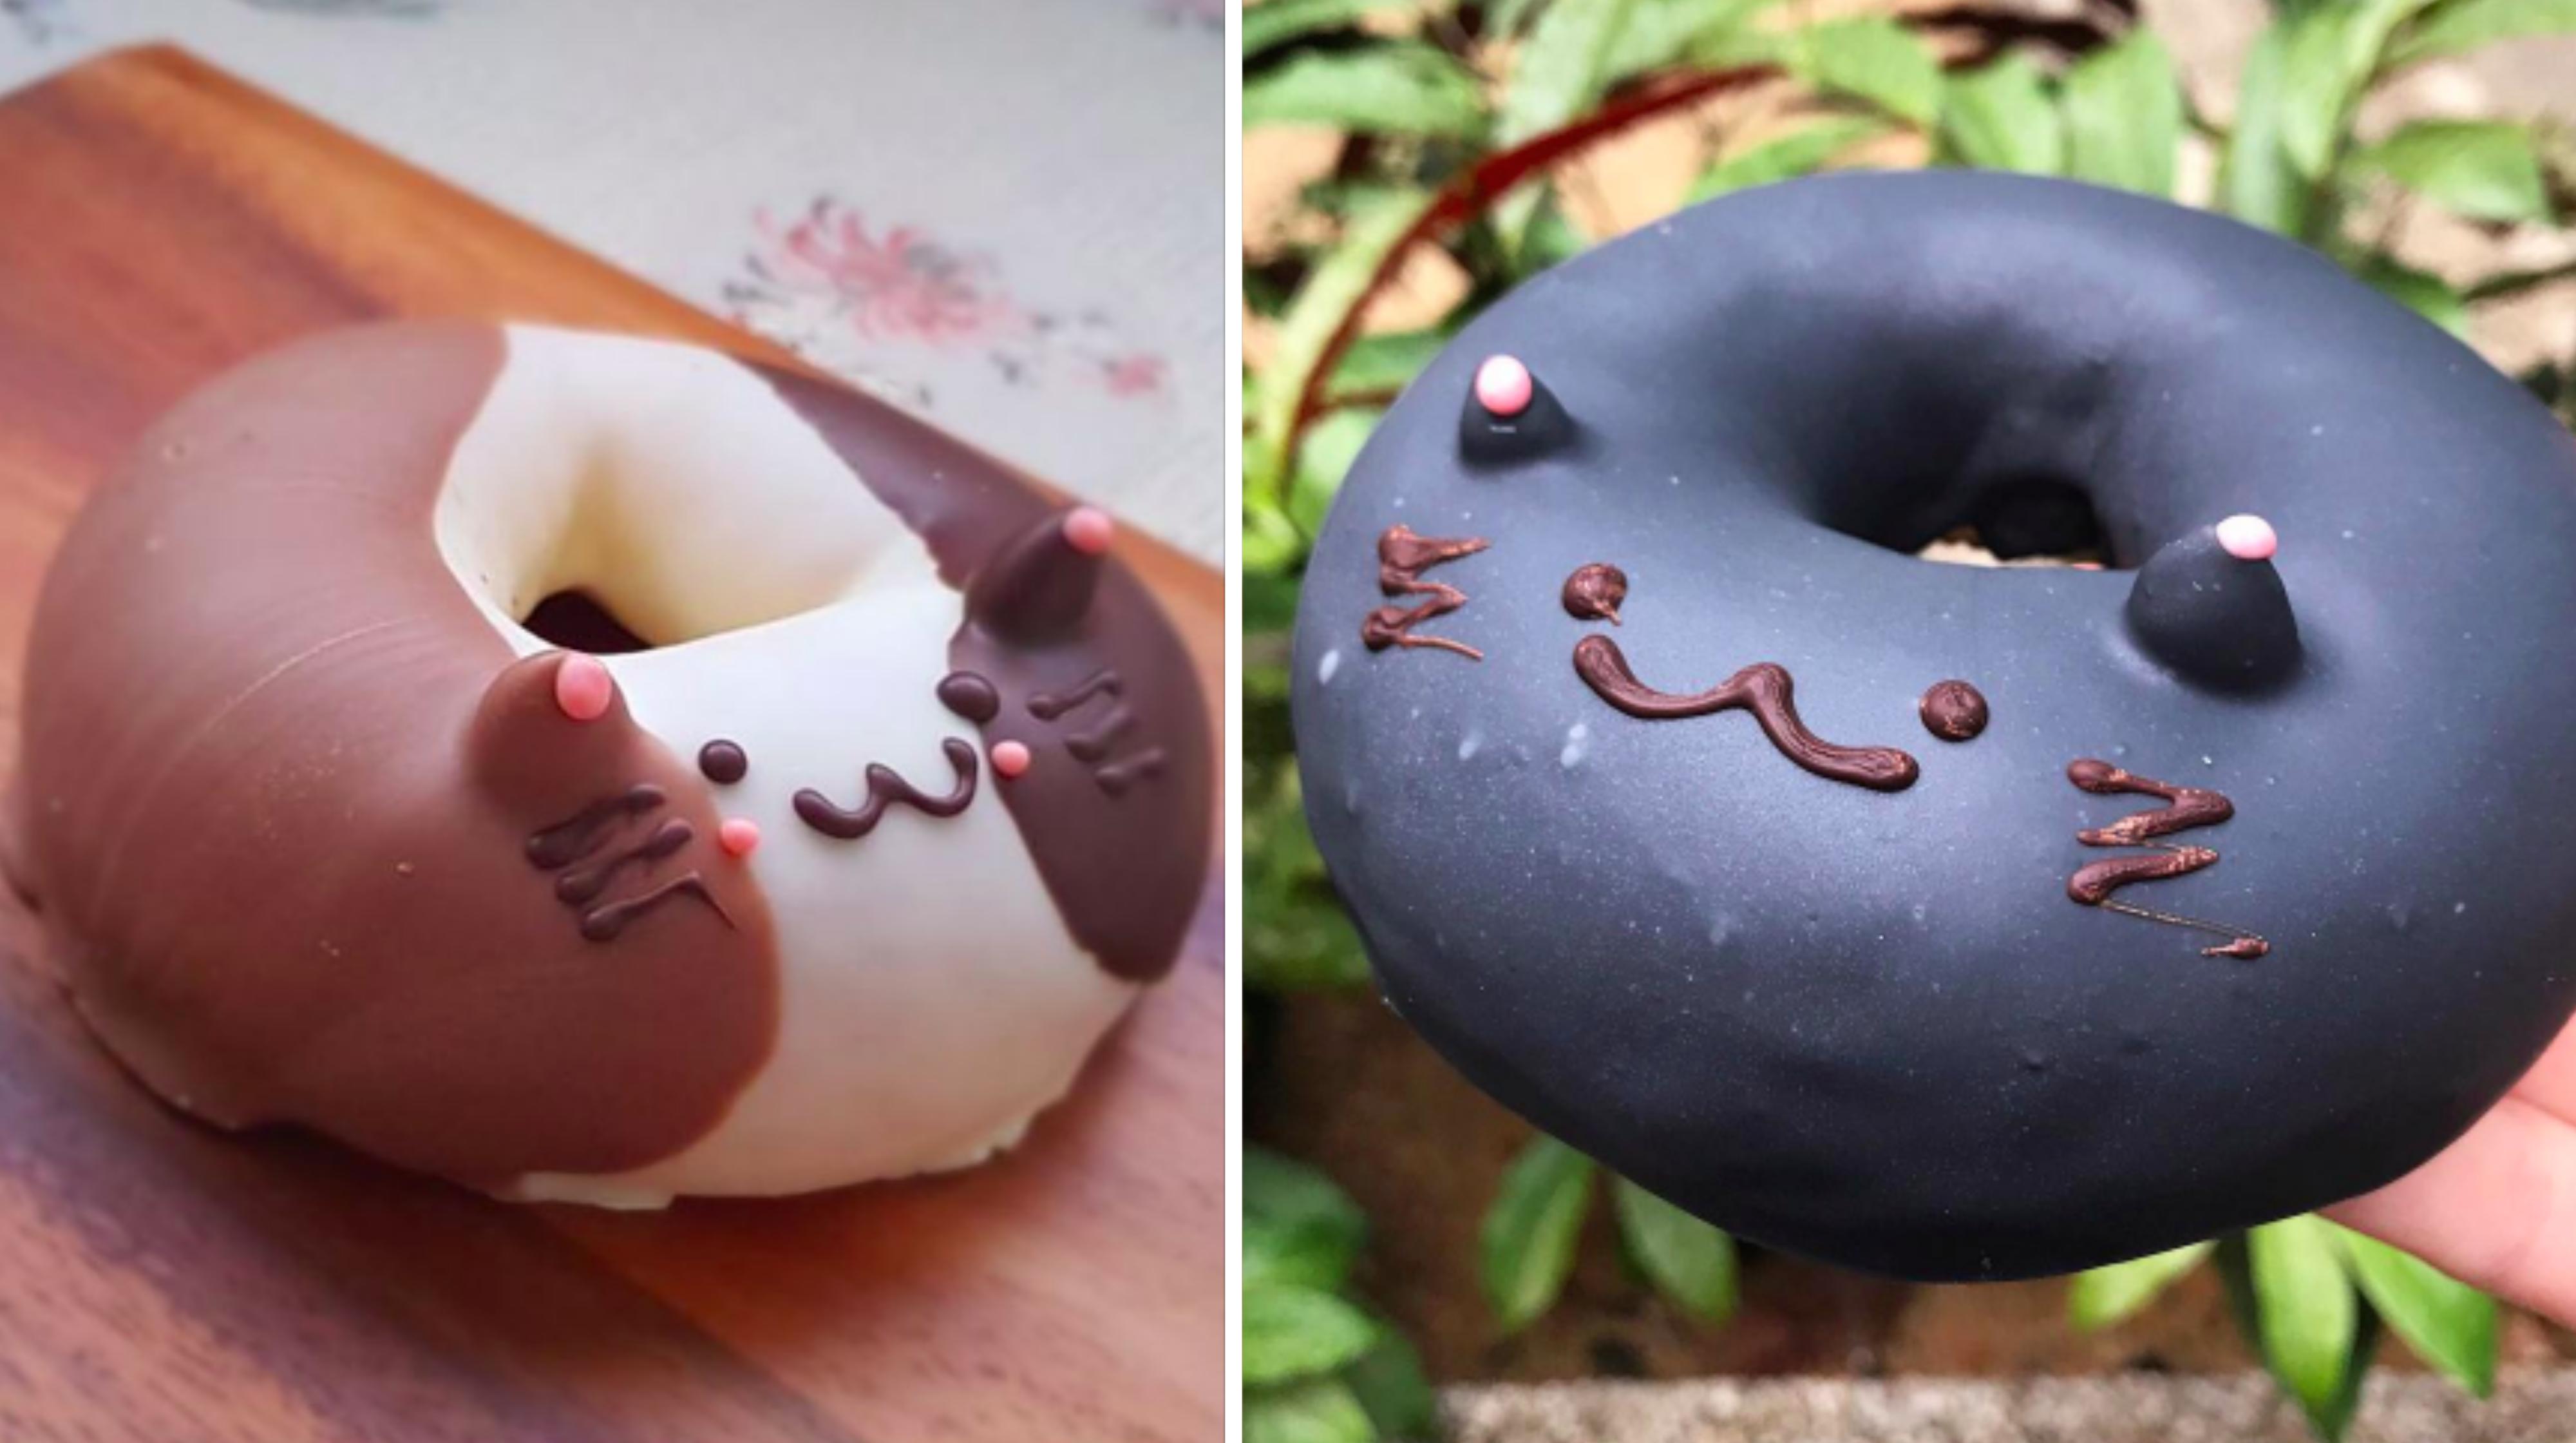 Adorable cat donuts available at Jurong Point for S$2.20 each